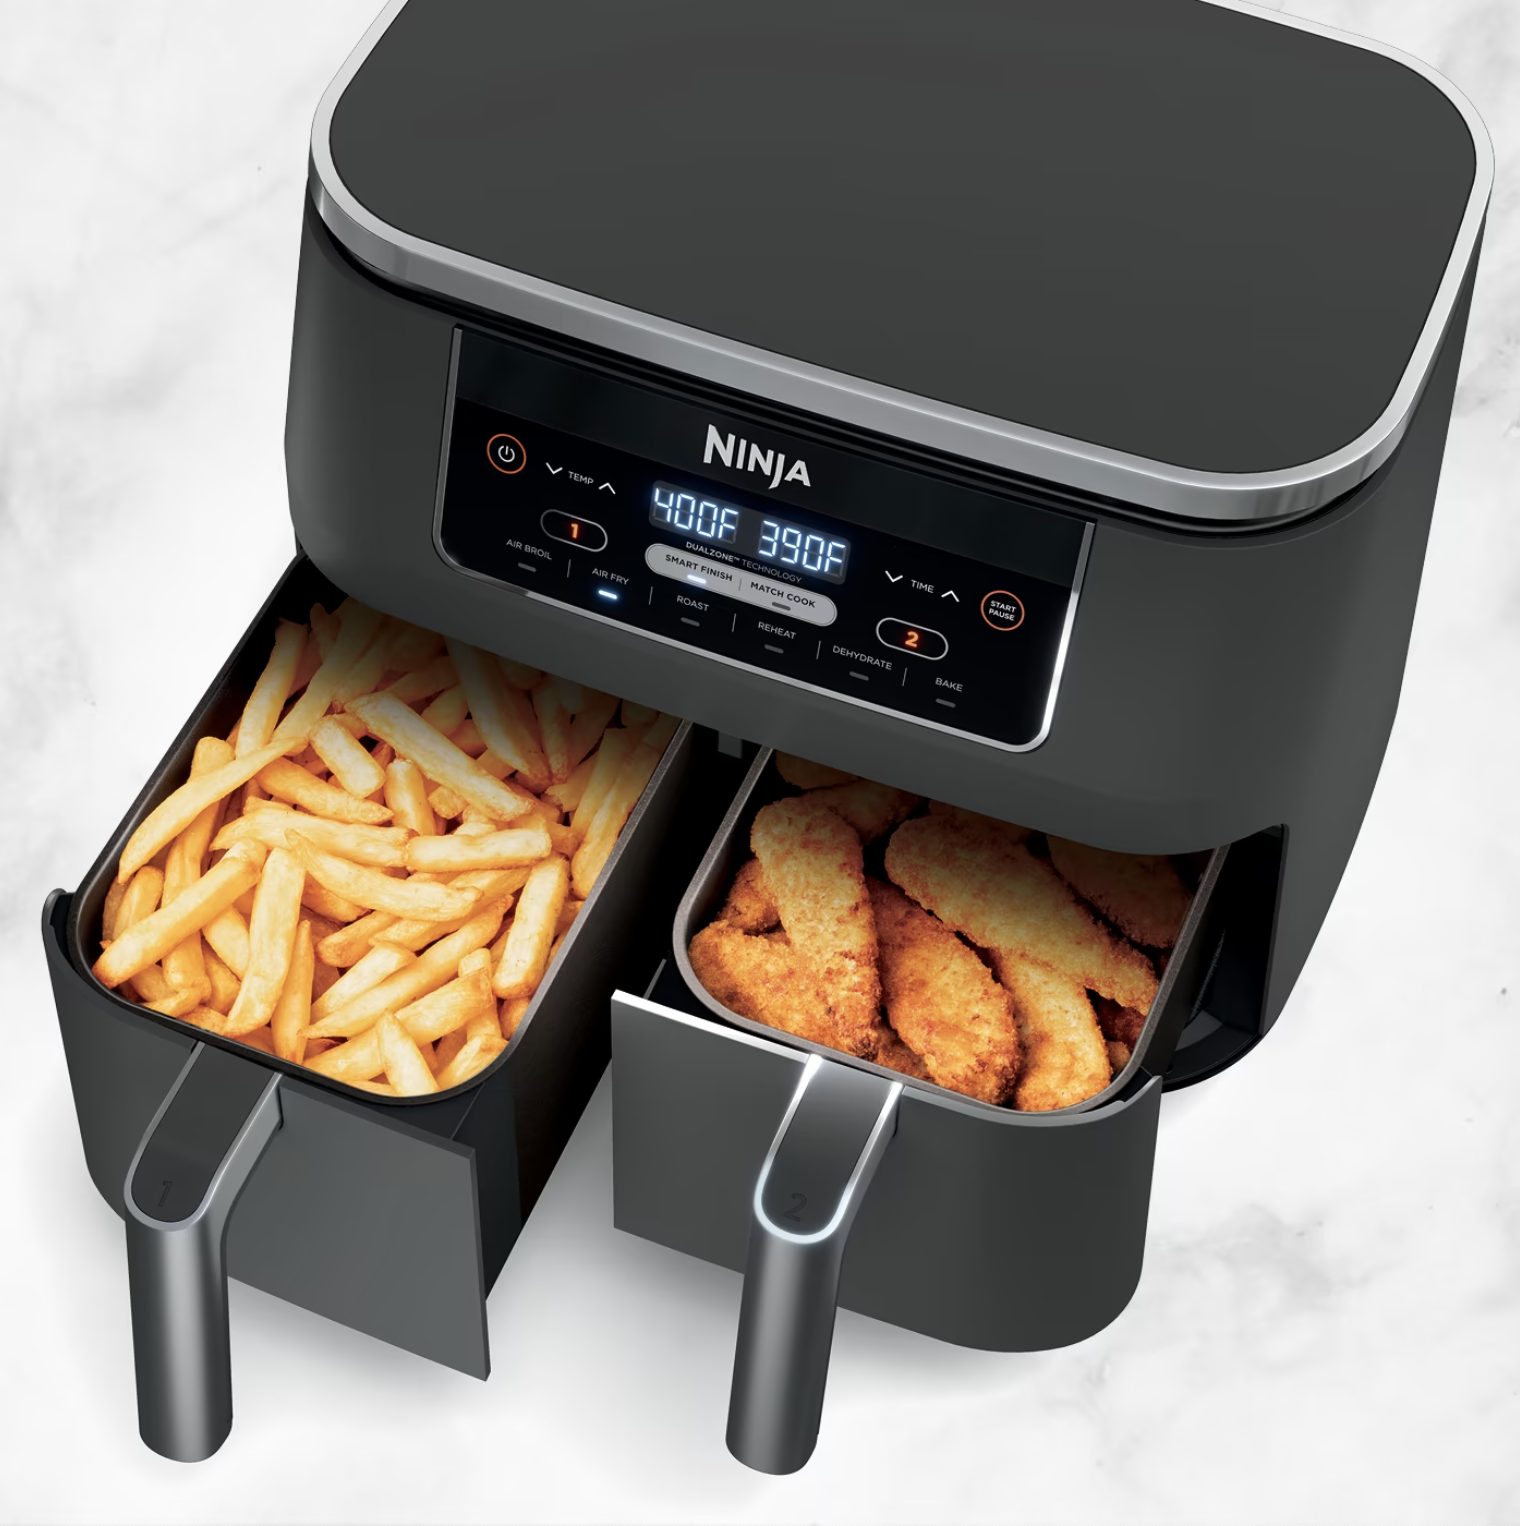 The air fryer baskets filled with fries and chicken tenders